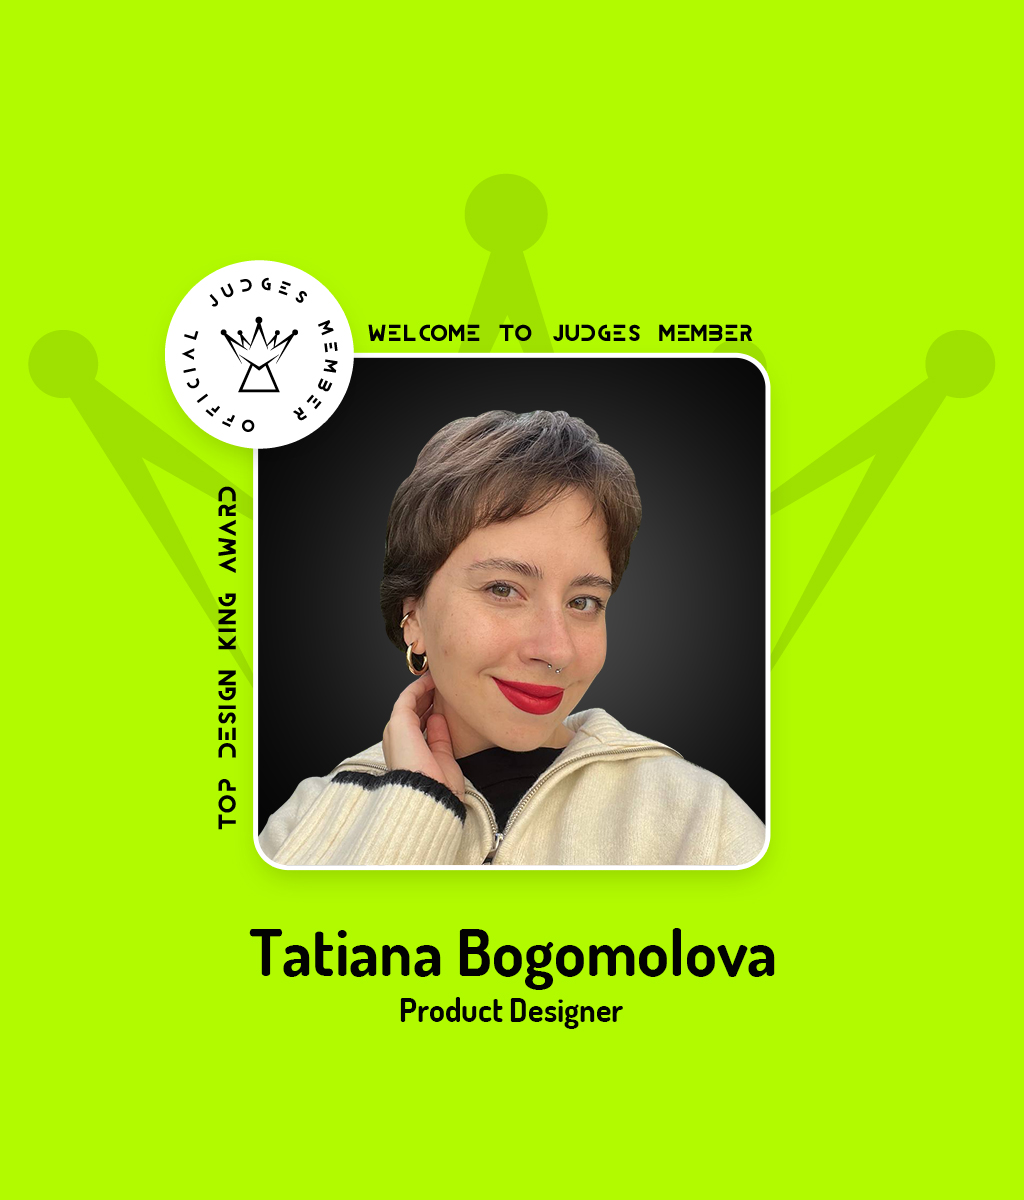 We're happy to share that Tatiana Bogomolova, Product Designer has been selected as Top Design King Awards jury. We admire you that you are the part of our group.
topdesignking.com/judges/169/tat…

#topdesignking #jury #judges #juryteam #awards #designaward #webdesign #designinspiration